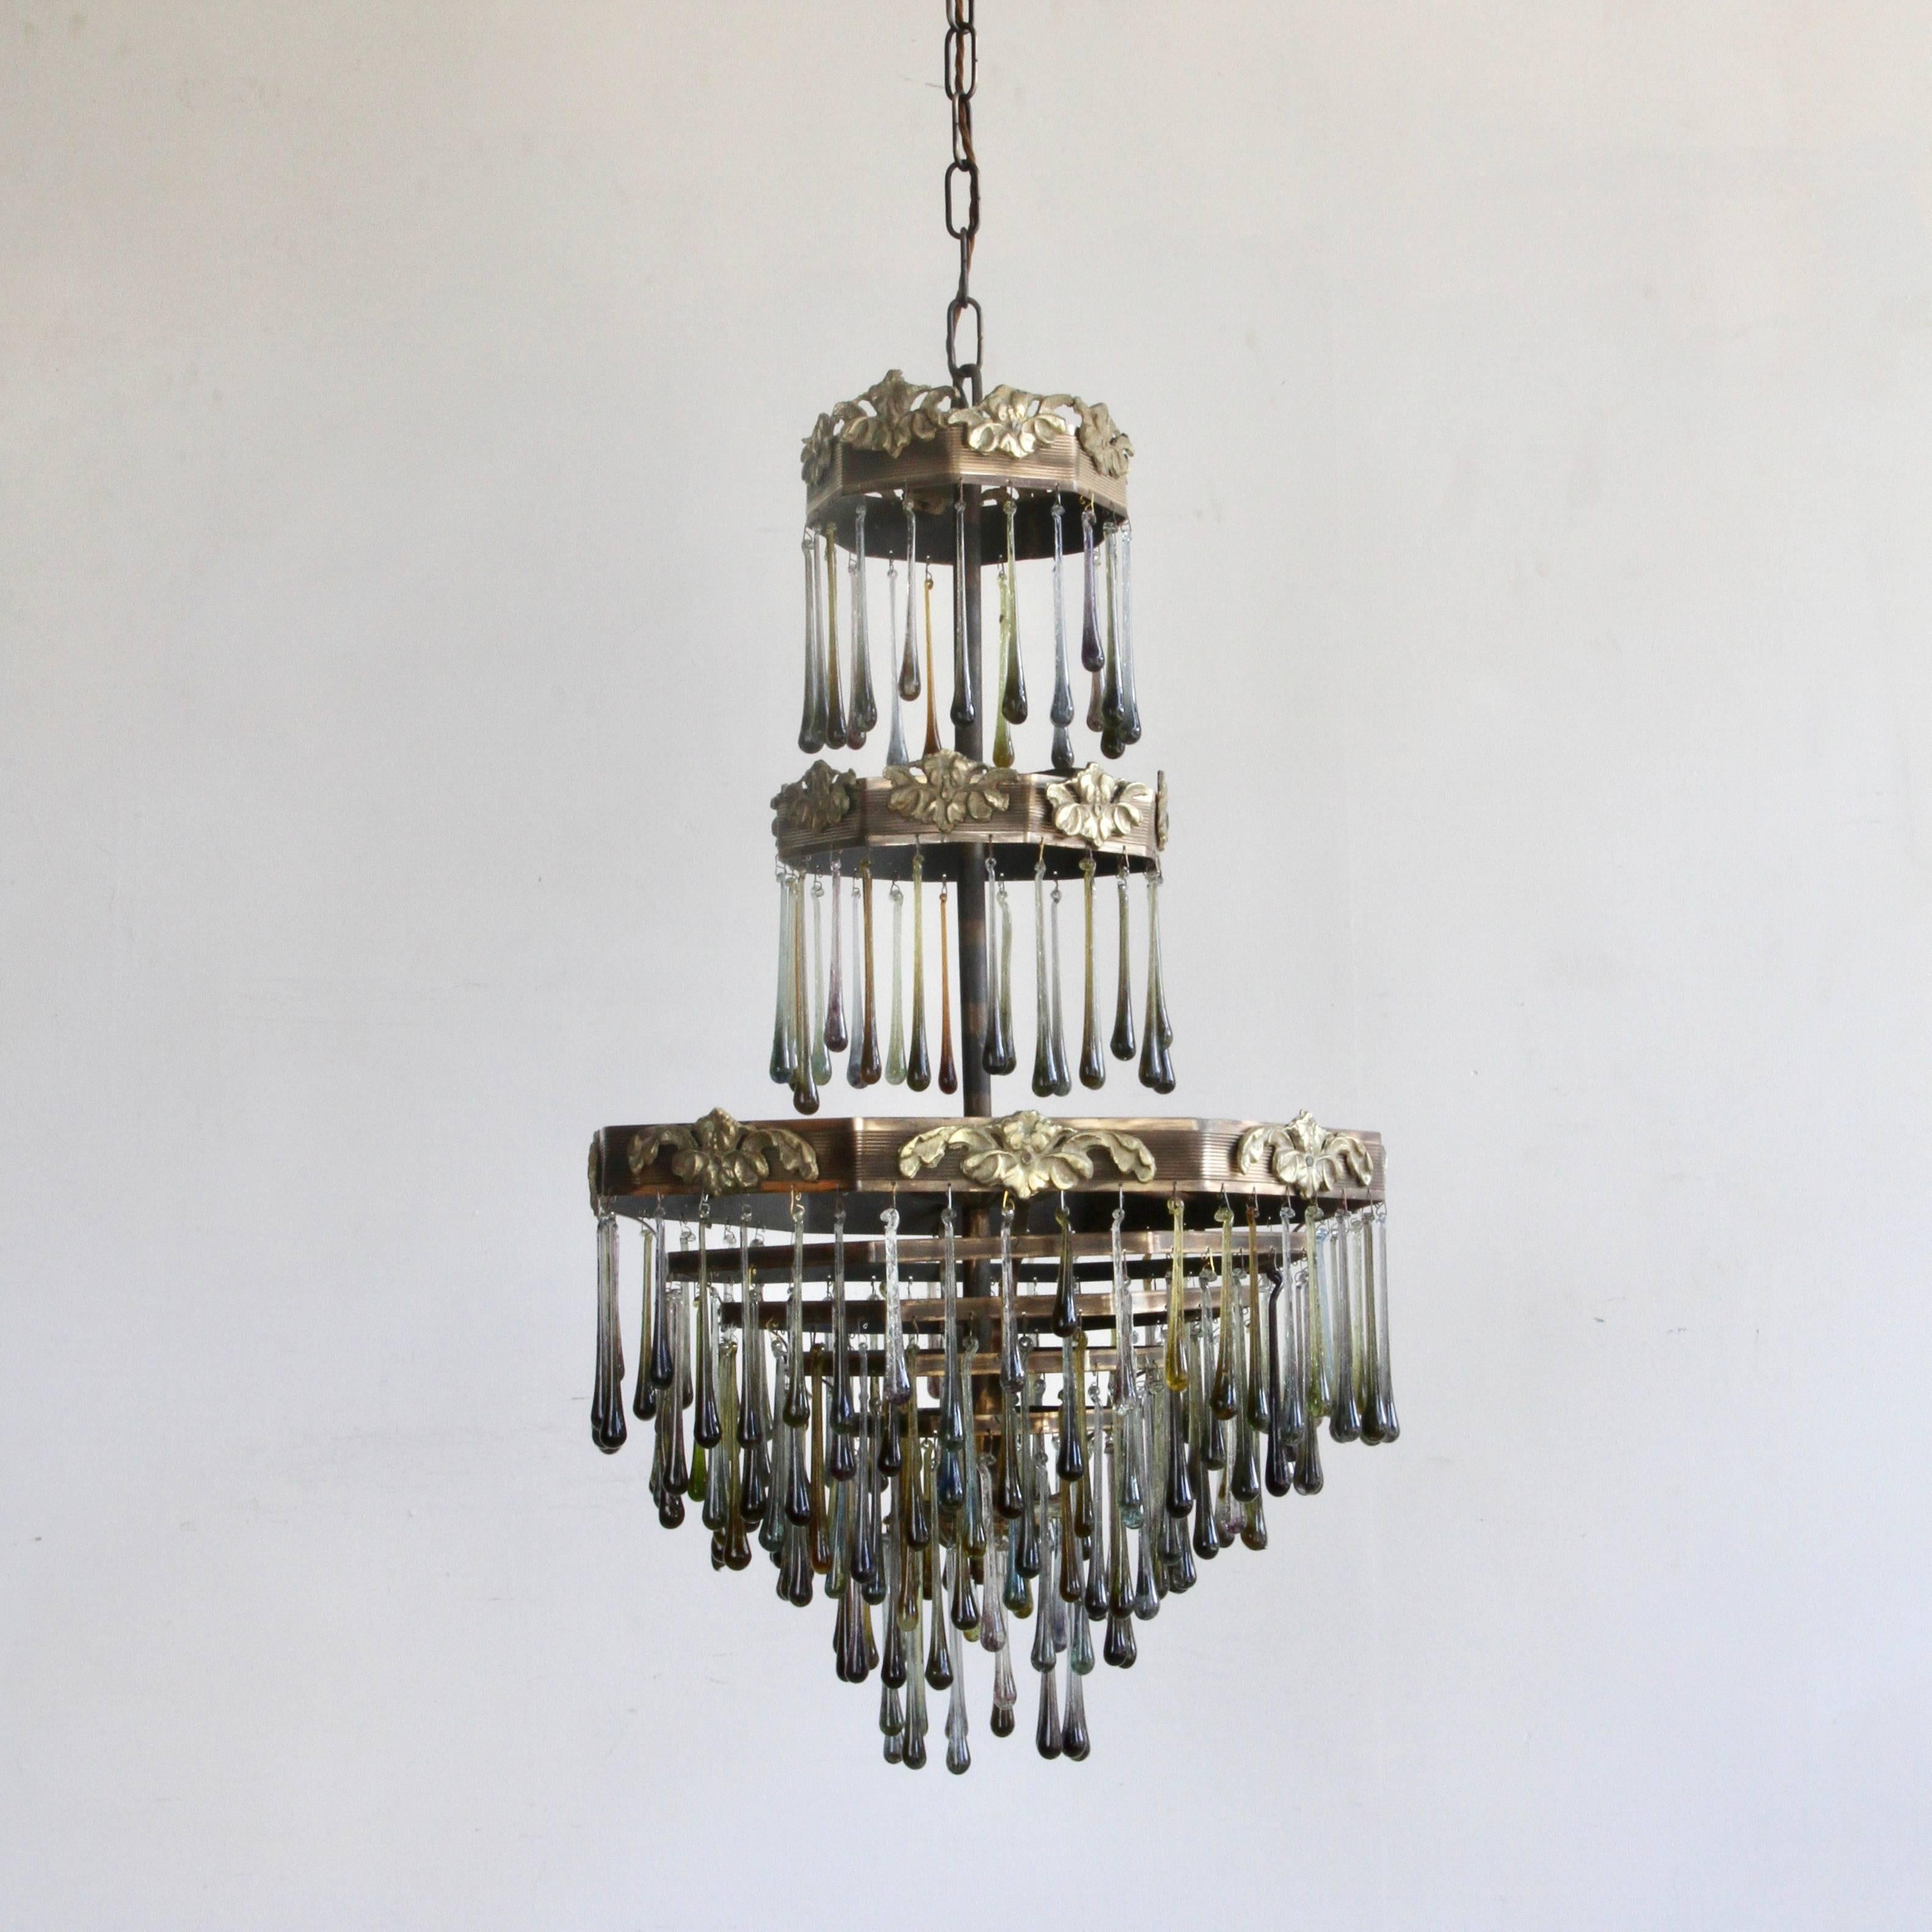 A 1920s French Waterfall chandelier frame dressed with handmade contemporary smokey glass teardrops. Chandelier uses four SBC fittings, B15. Supplied with chain and ceiling rose.